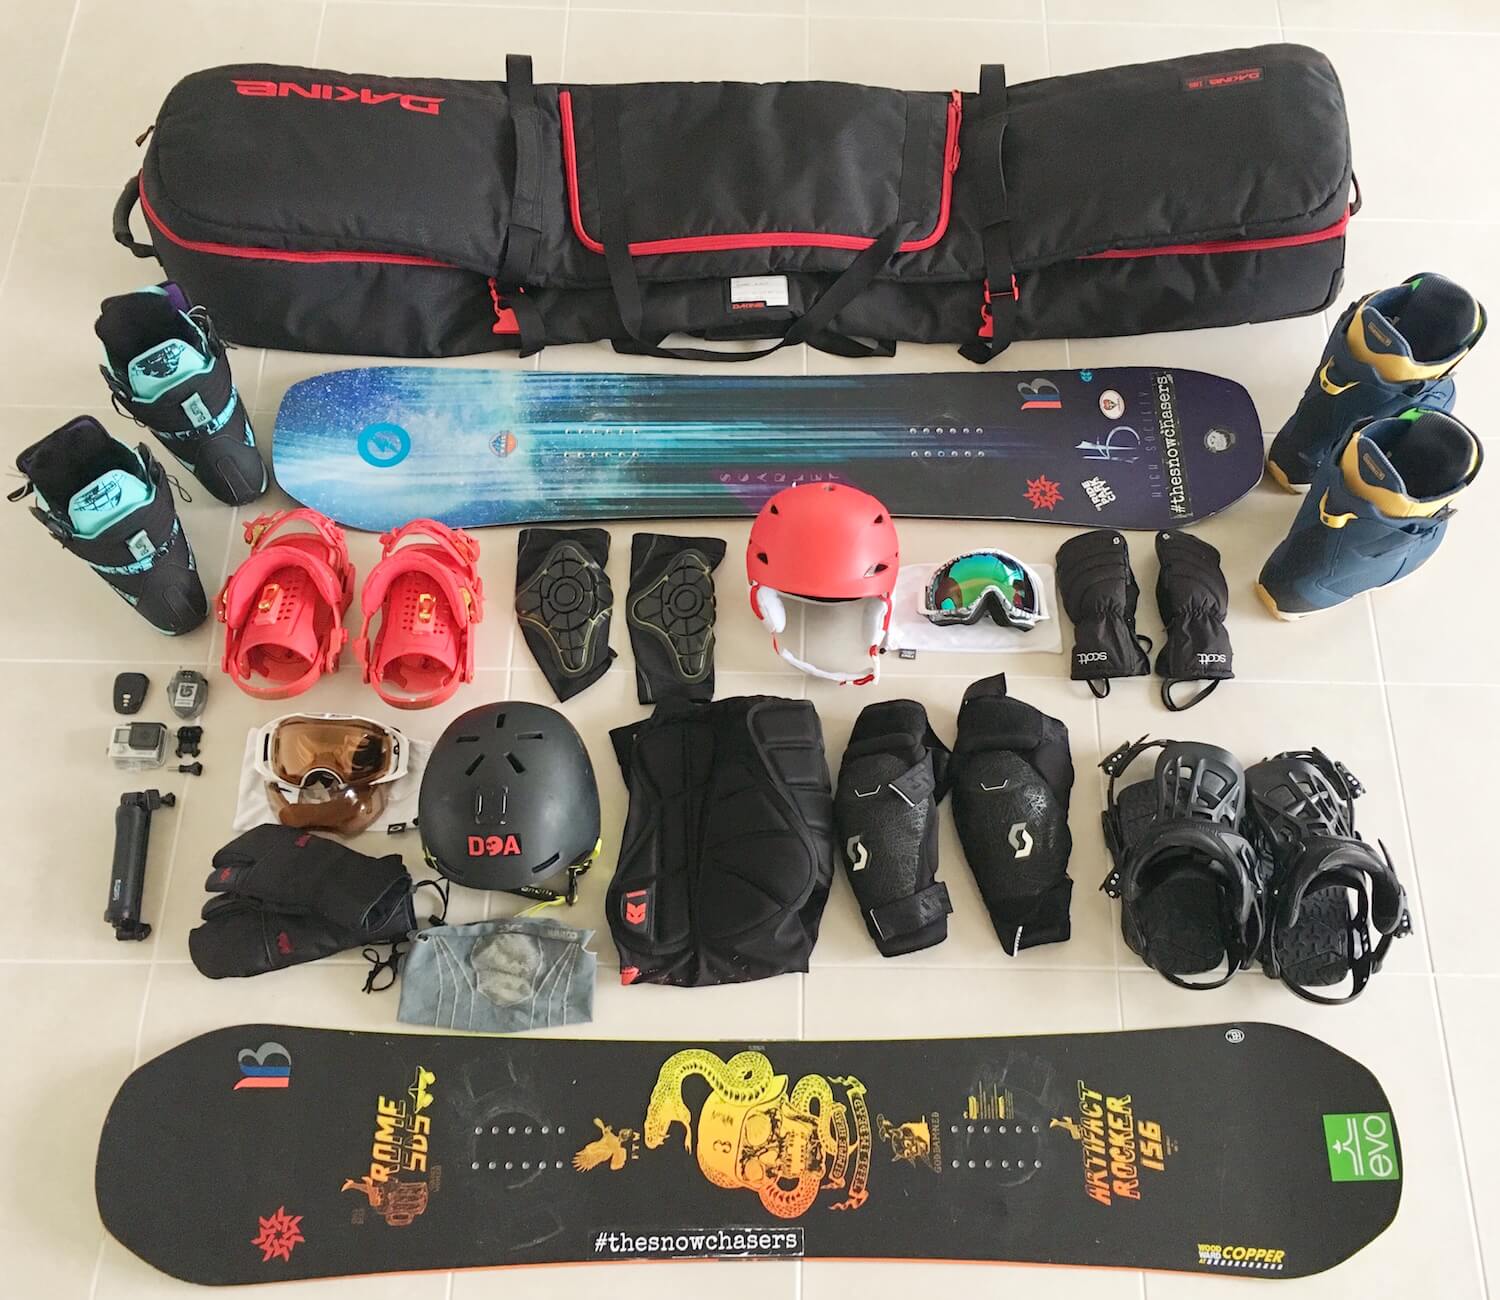 omvatten Pelagisch Duidelijk maken The Snow Chasers - Travel, Snowboard & Ski Blog — The Snow Chasers | travel  tips for skiers & snowboarders